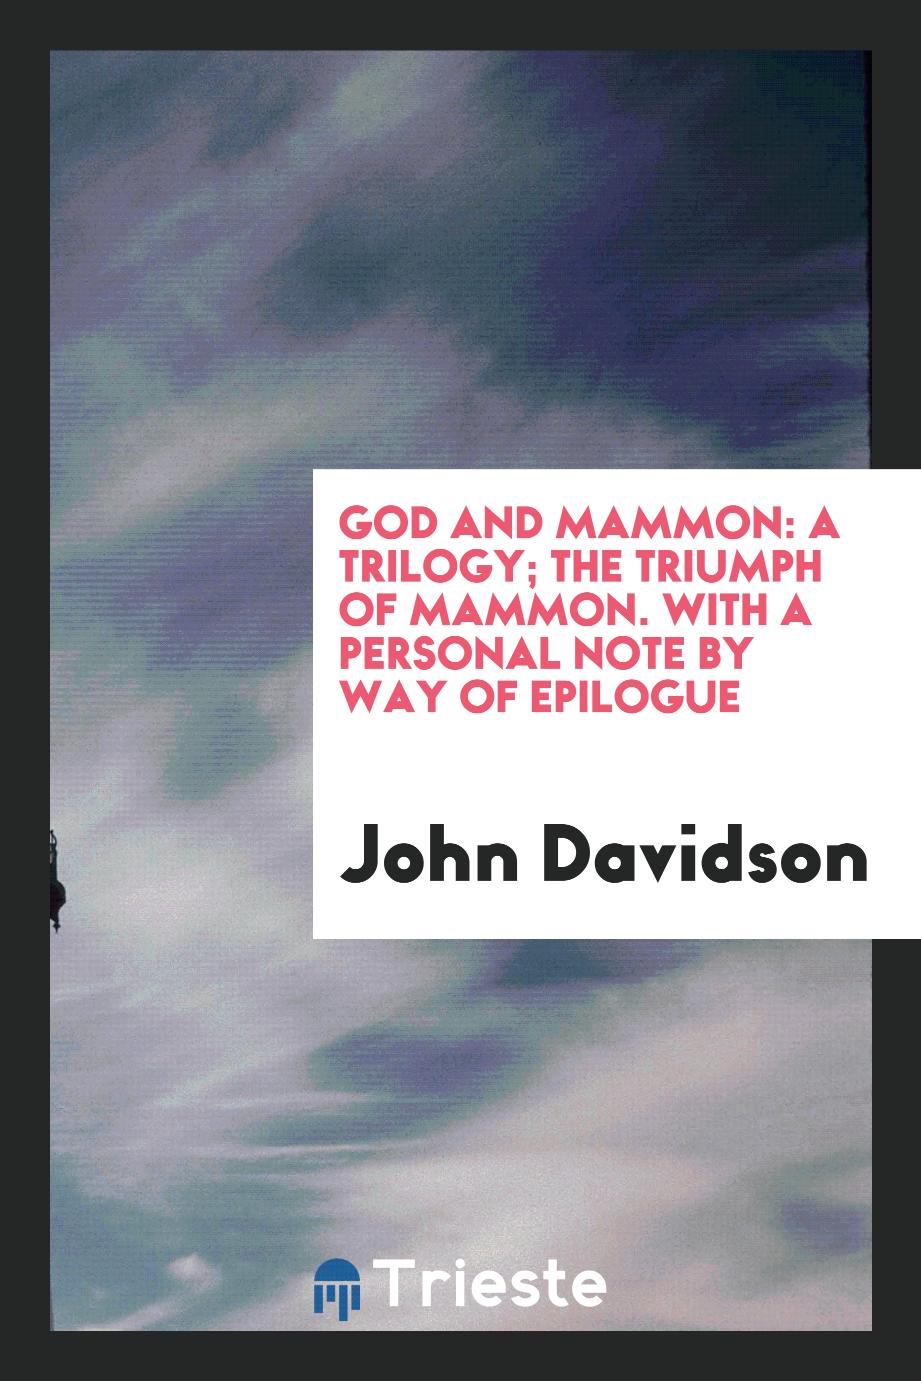 God and Mammon: A Trilogy; The Triumph of Mammon. With a Personal Note by Way of Epilogue